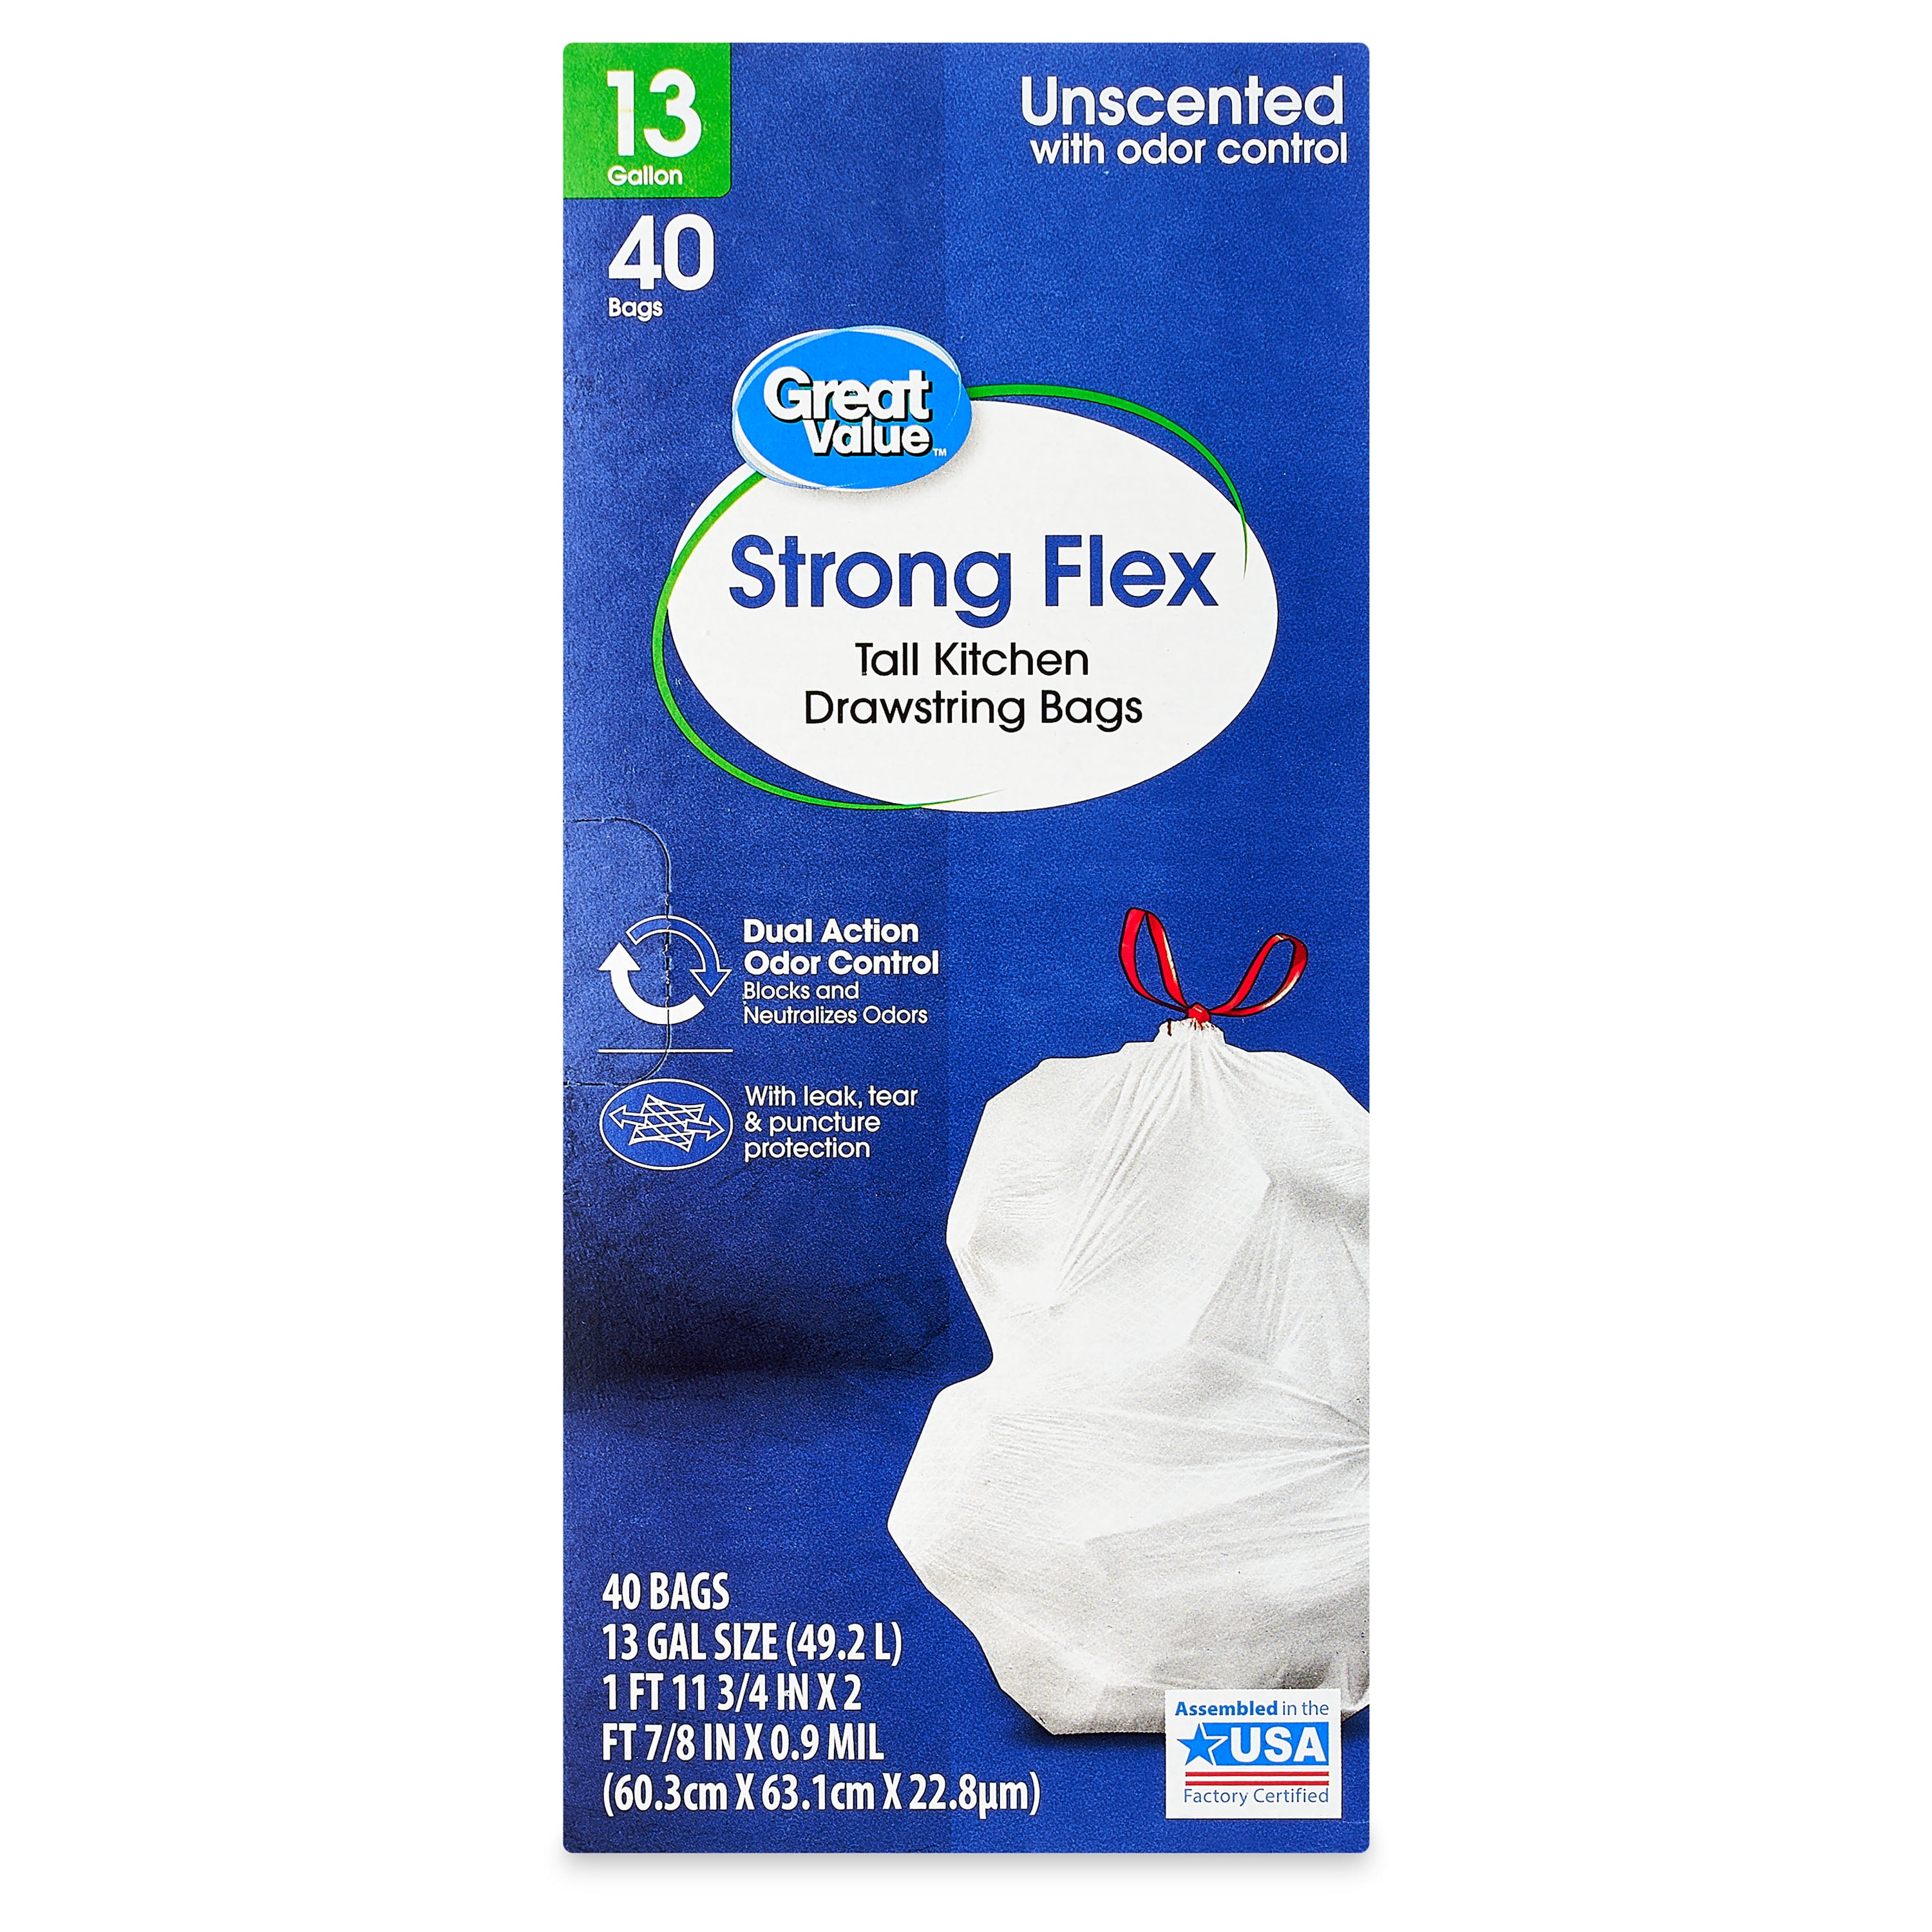 Great Value Strong Flex 13-Gallon Drawstring Tall Kitchen Trash Bags, Unscented, 40 Bags